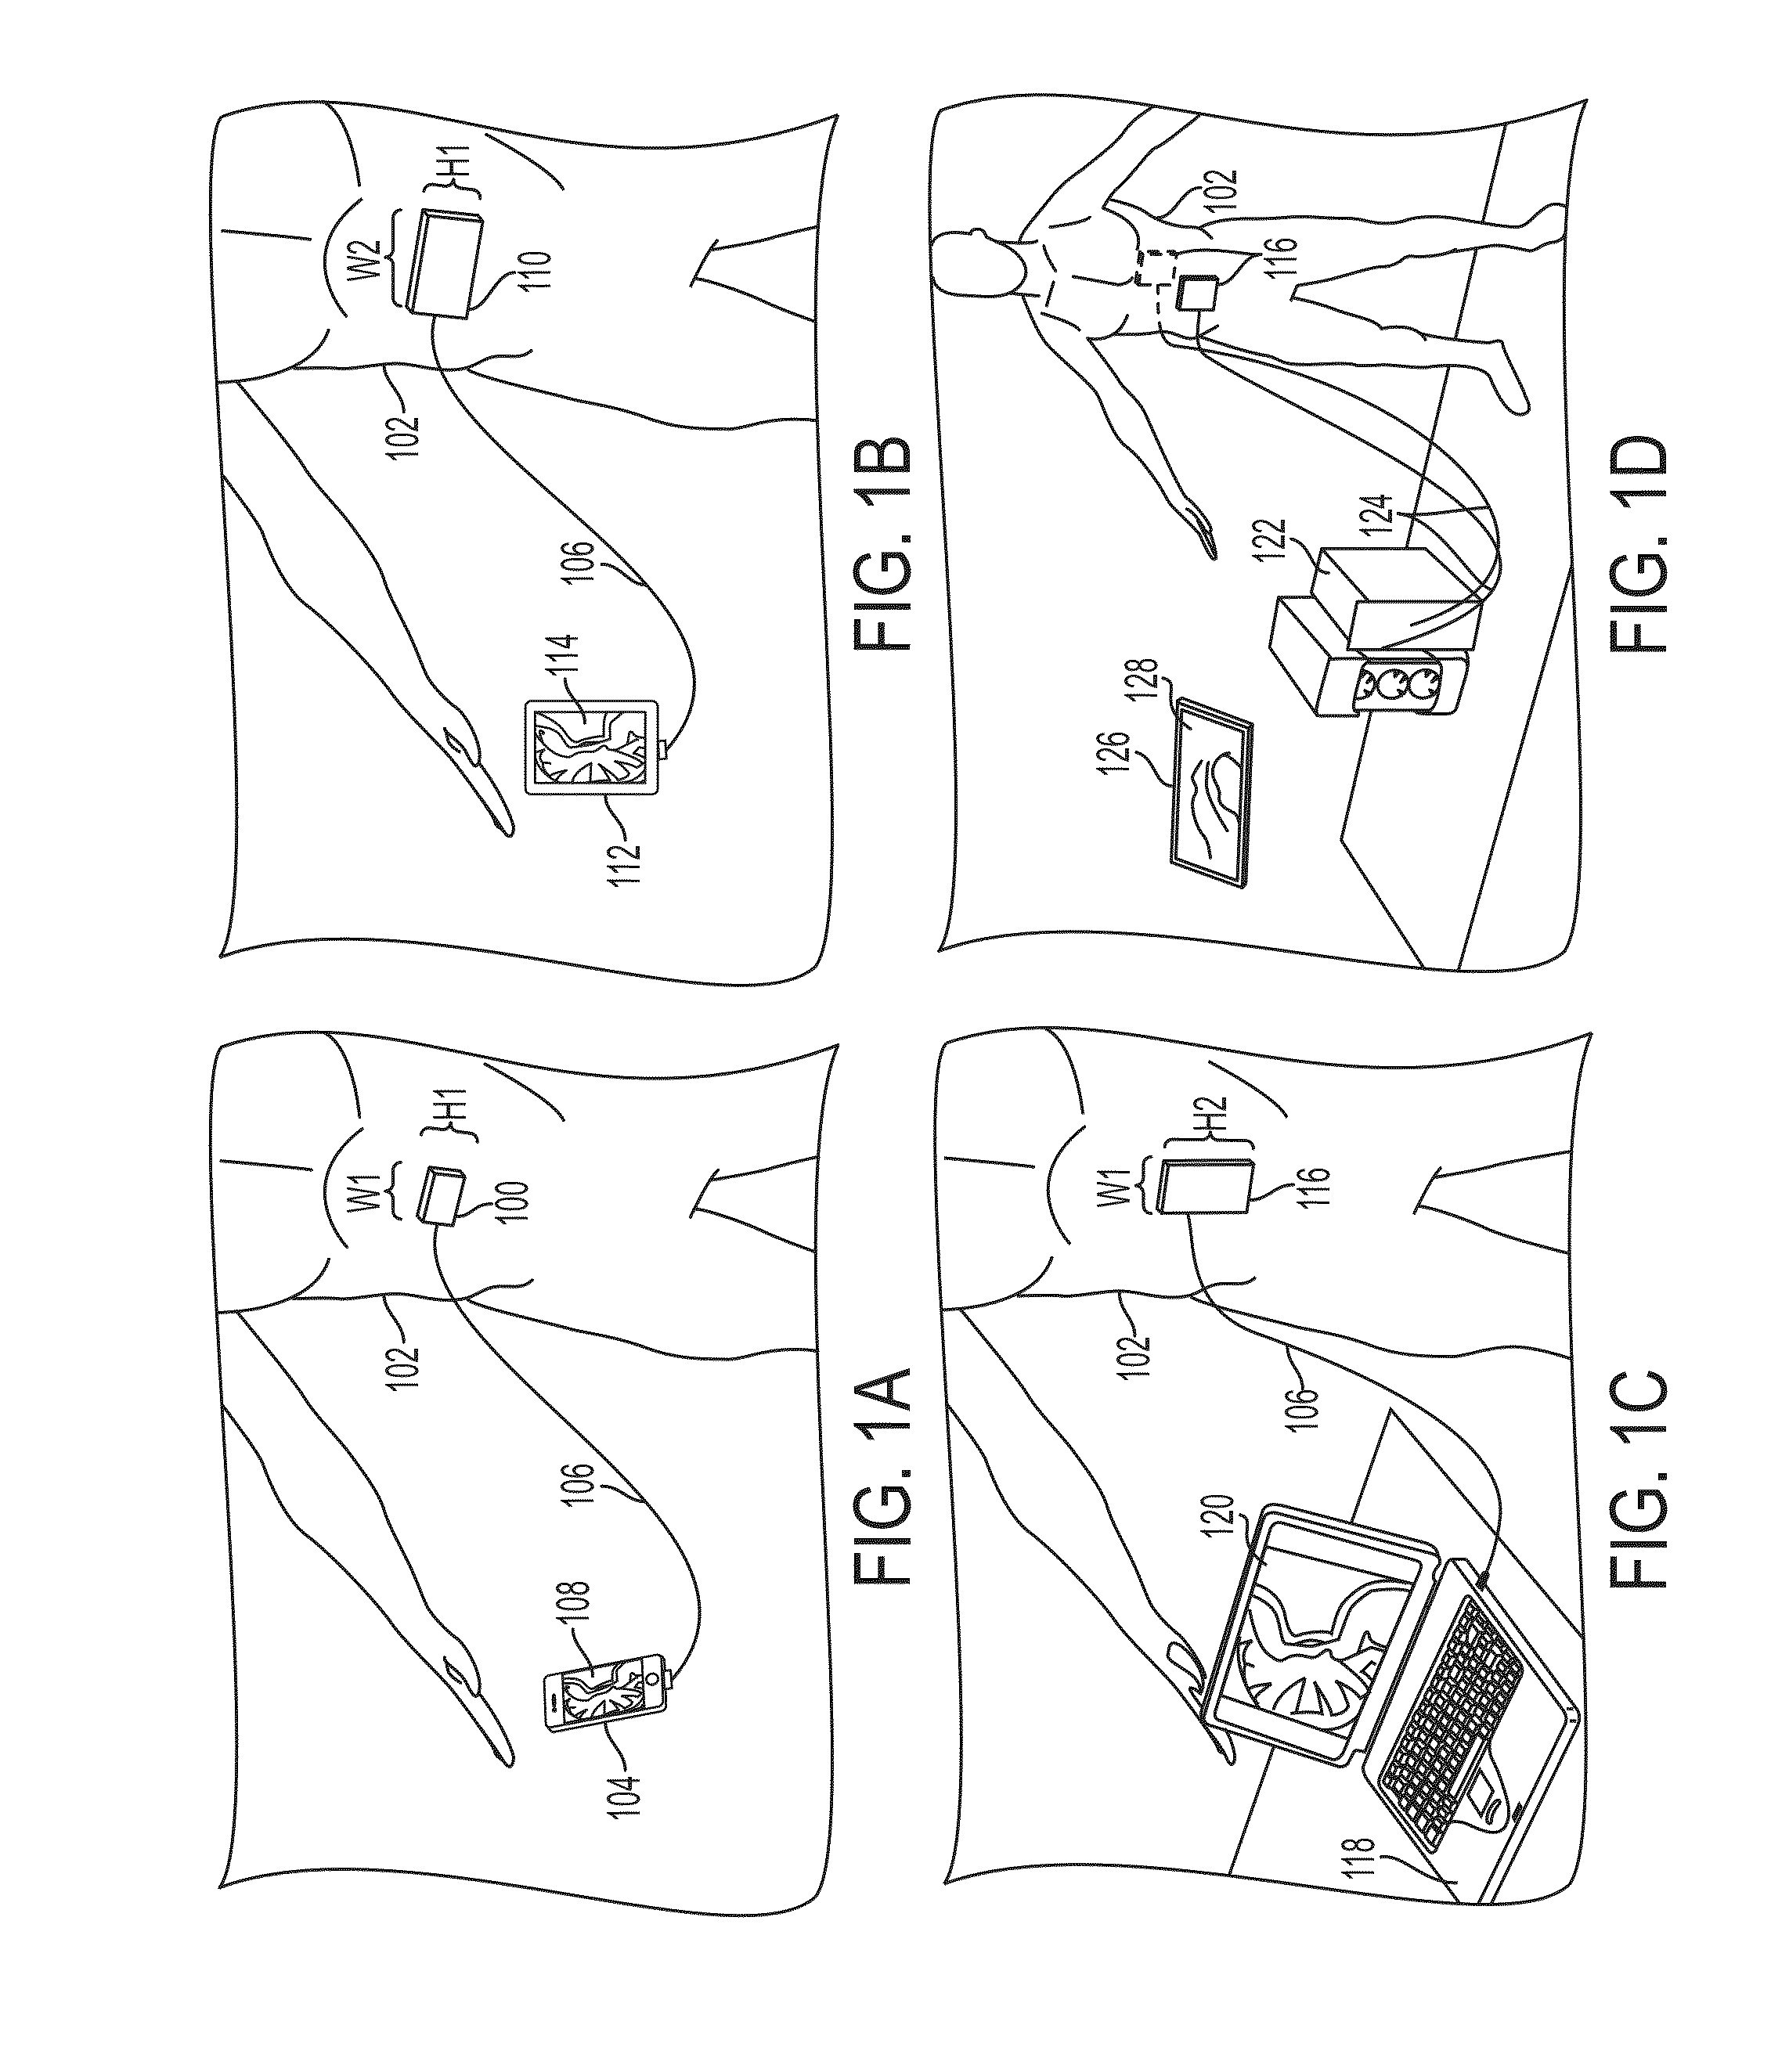 Interconnectable ultrasound transducer probes and related methods and apparatus